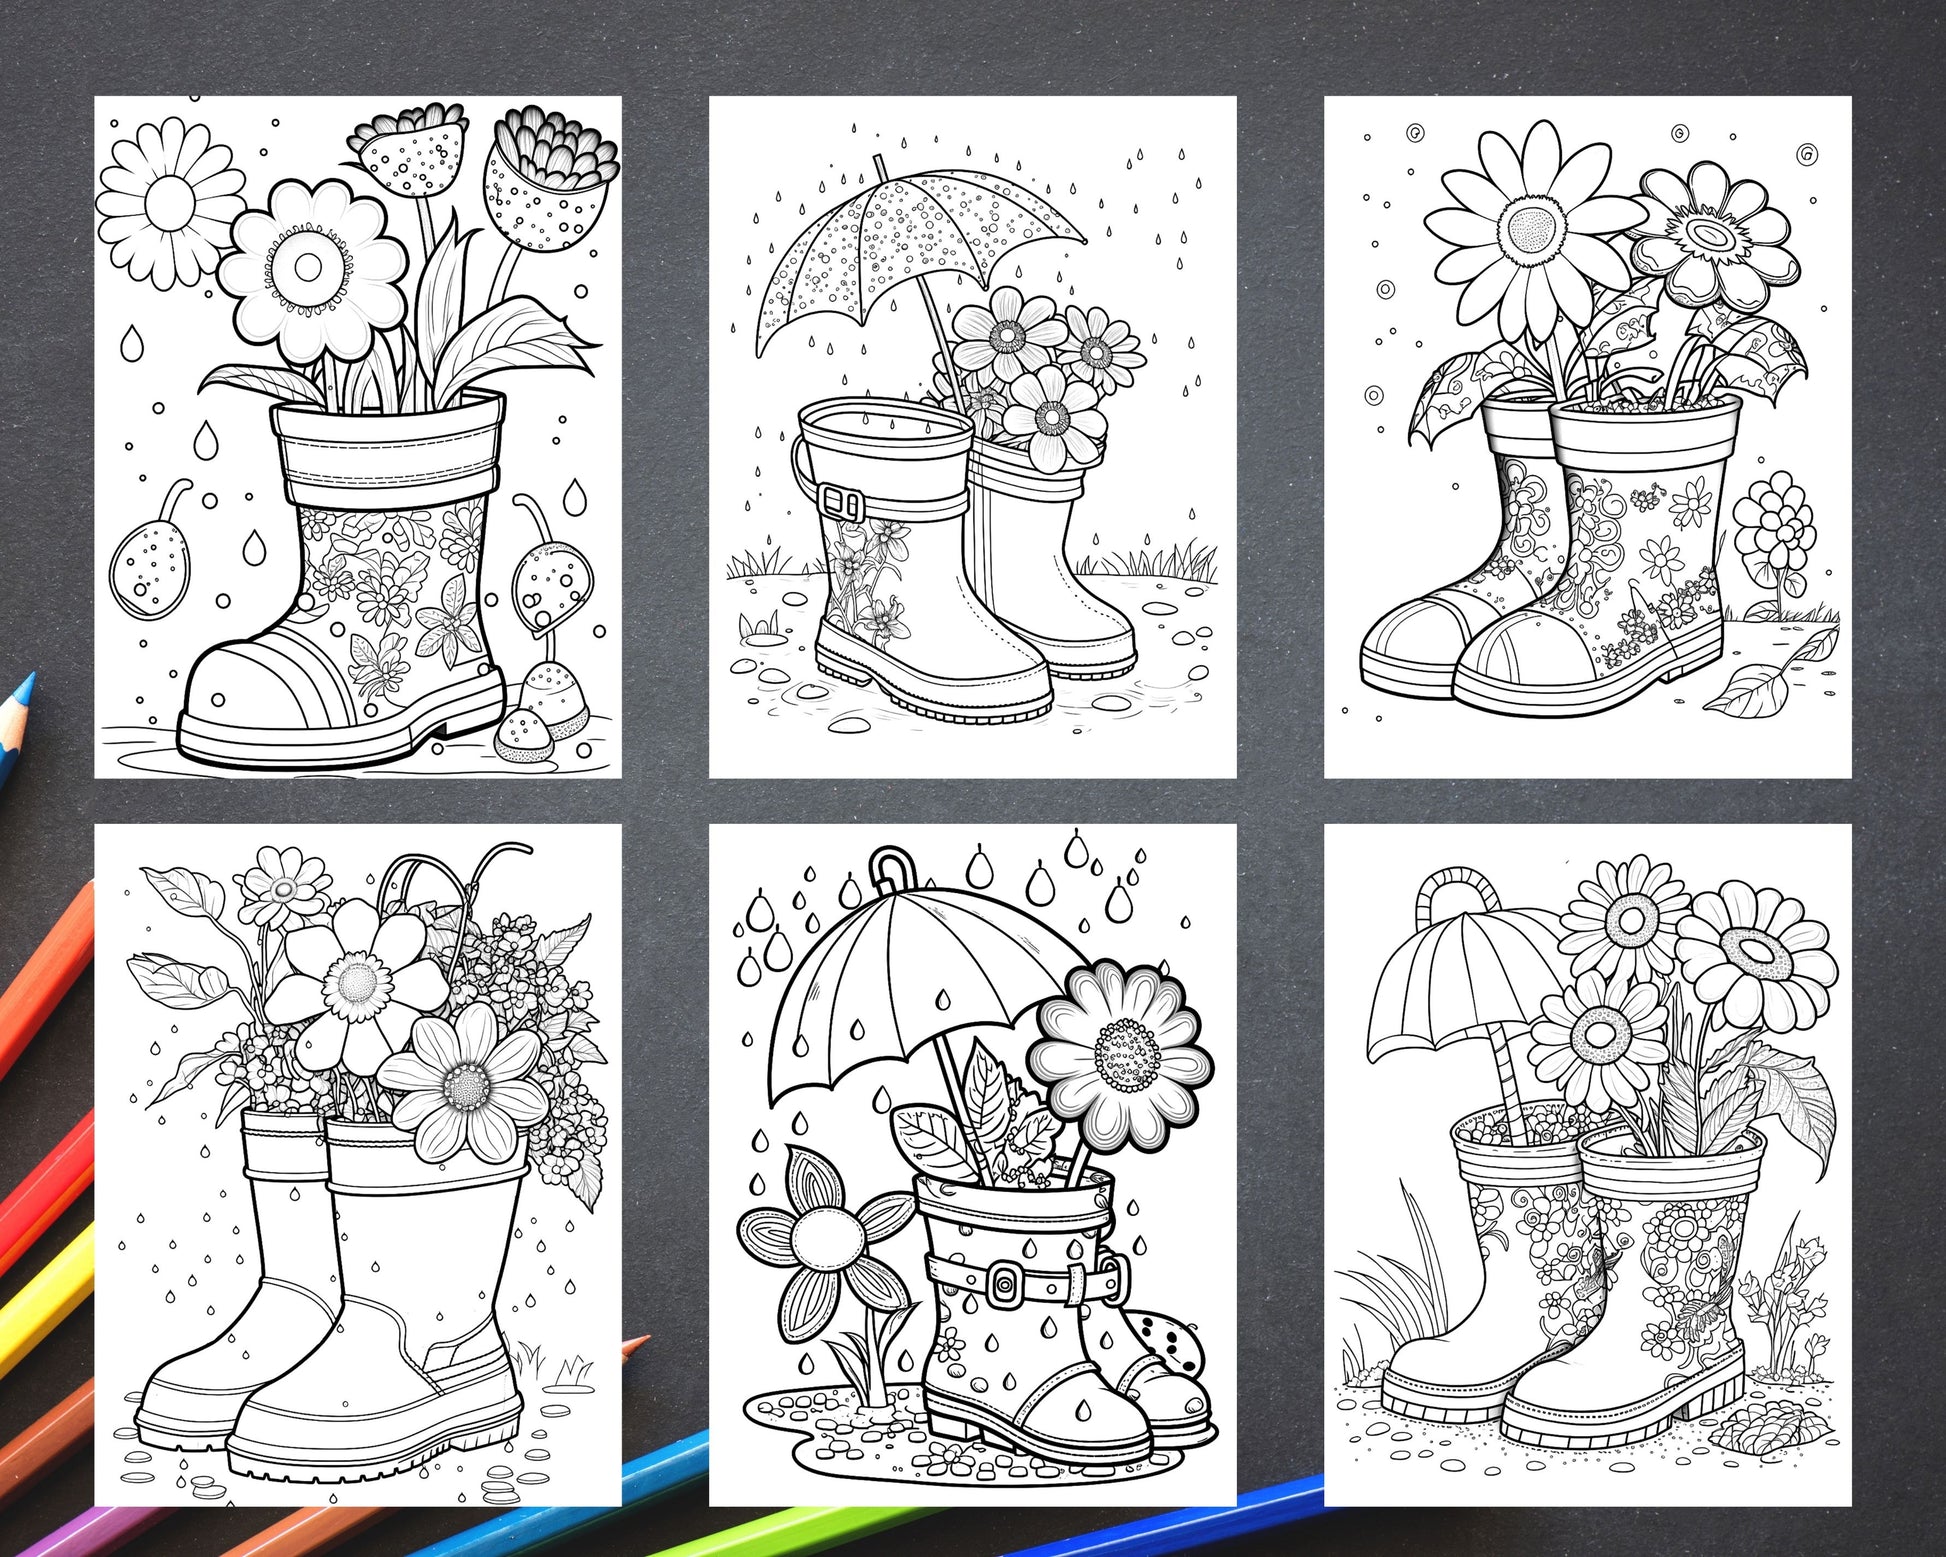 50 Printable Flower Rainboot Coloring Pages for Adults, Floral Grayscale Coloring Page, Printable PDF File Download - raspiee